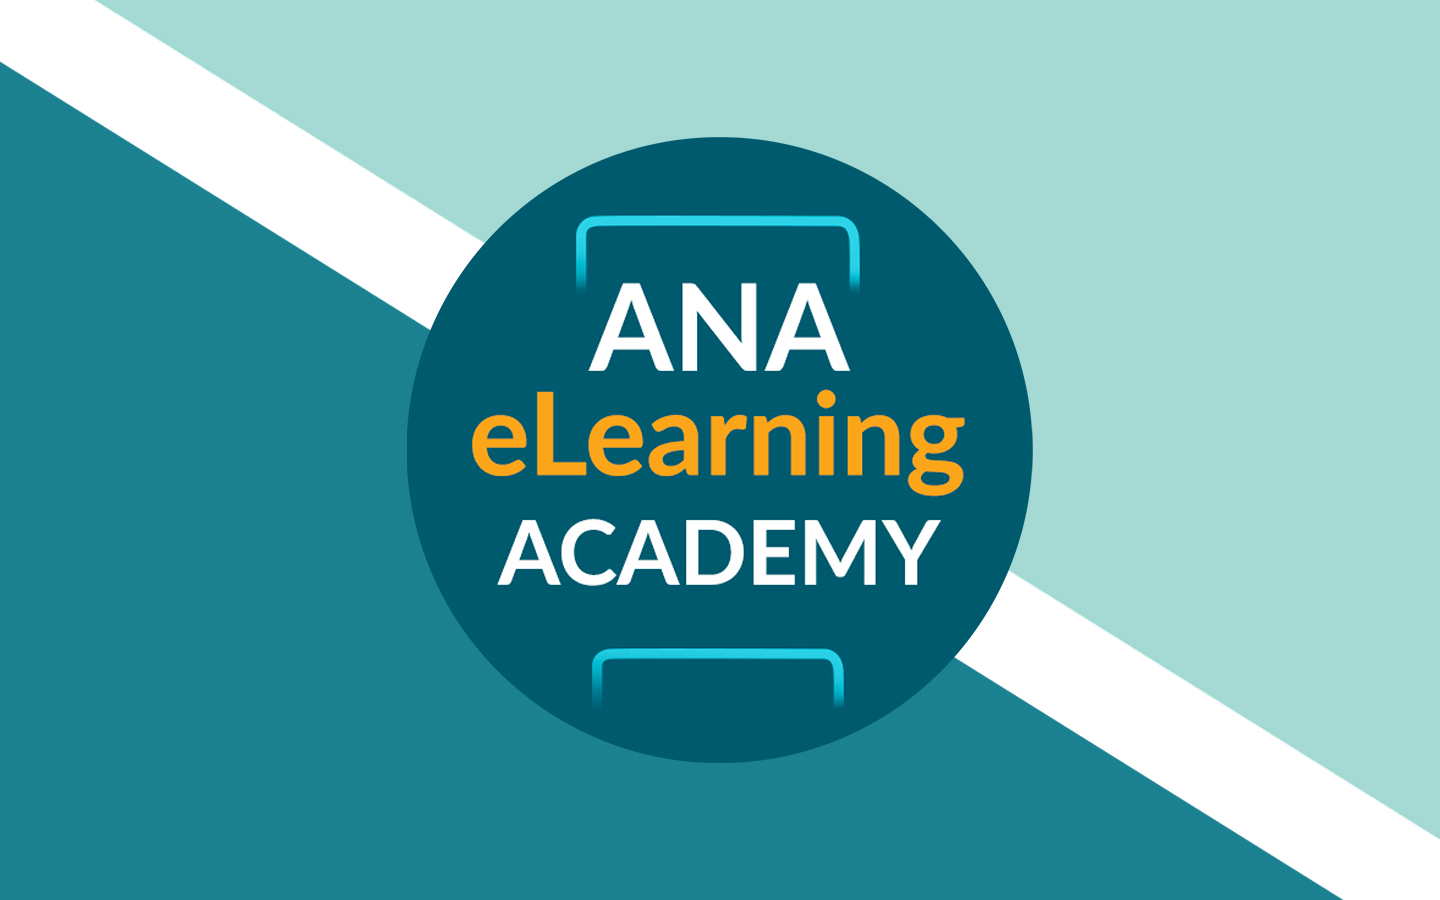 ANA eLearning Academy Launched on April 29